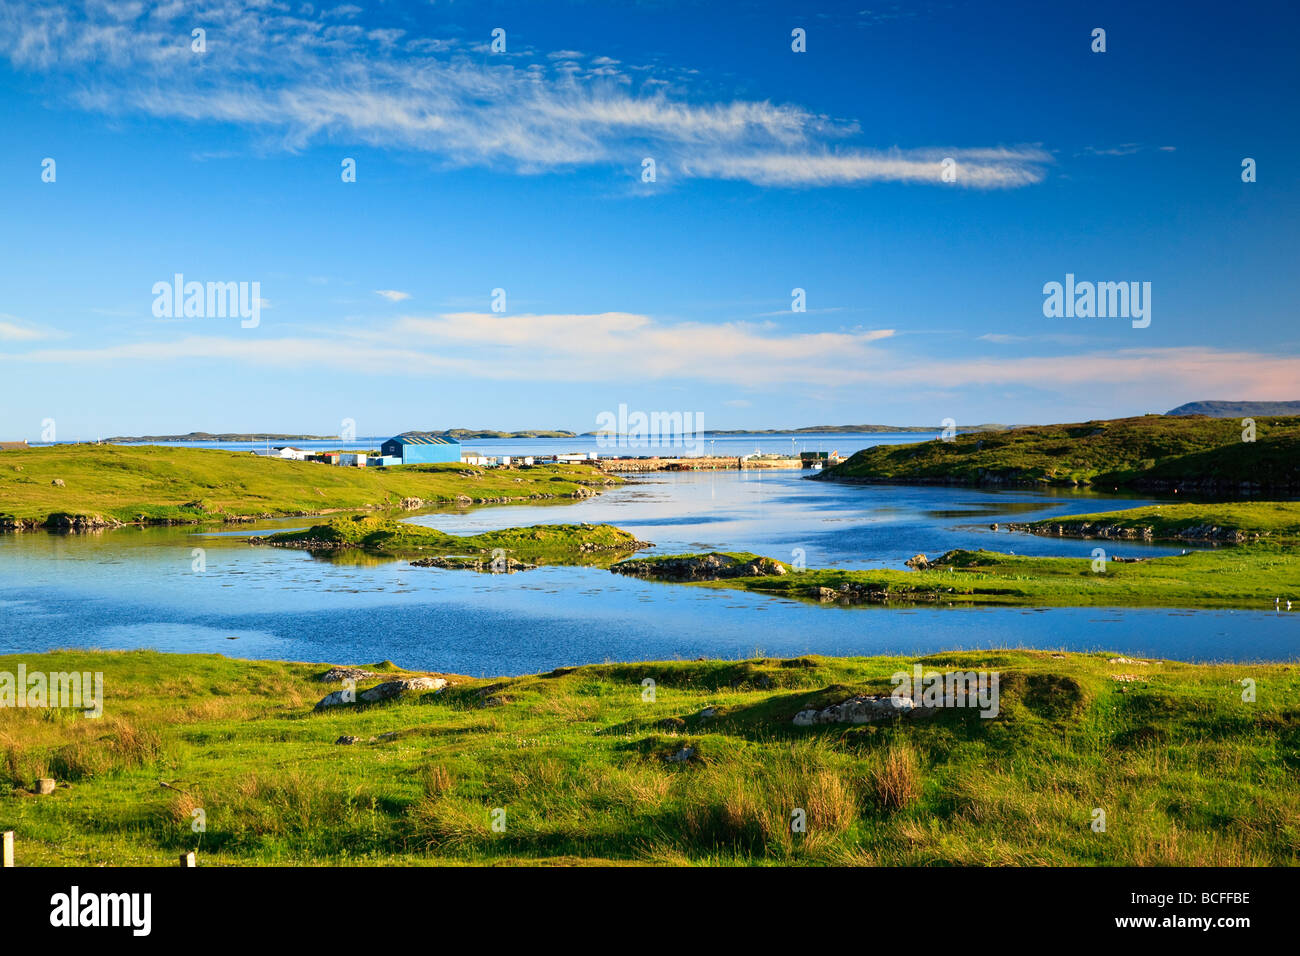 Leverburgh Isle of Harris, Outer Hebrides, Western Isles, Écosse, Royaume-Uni 2009 Banque D'Images